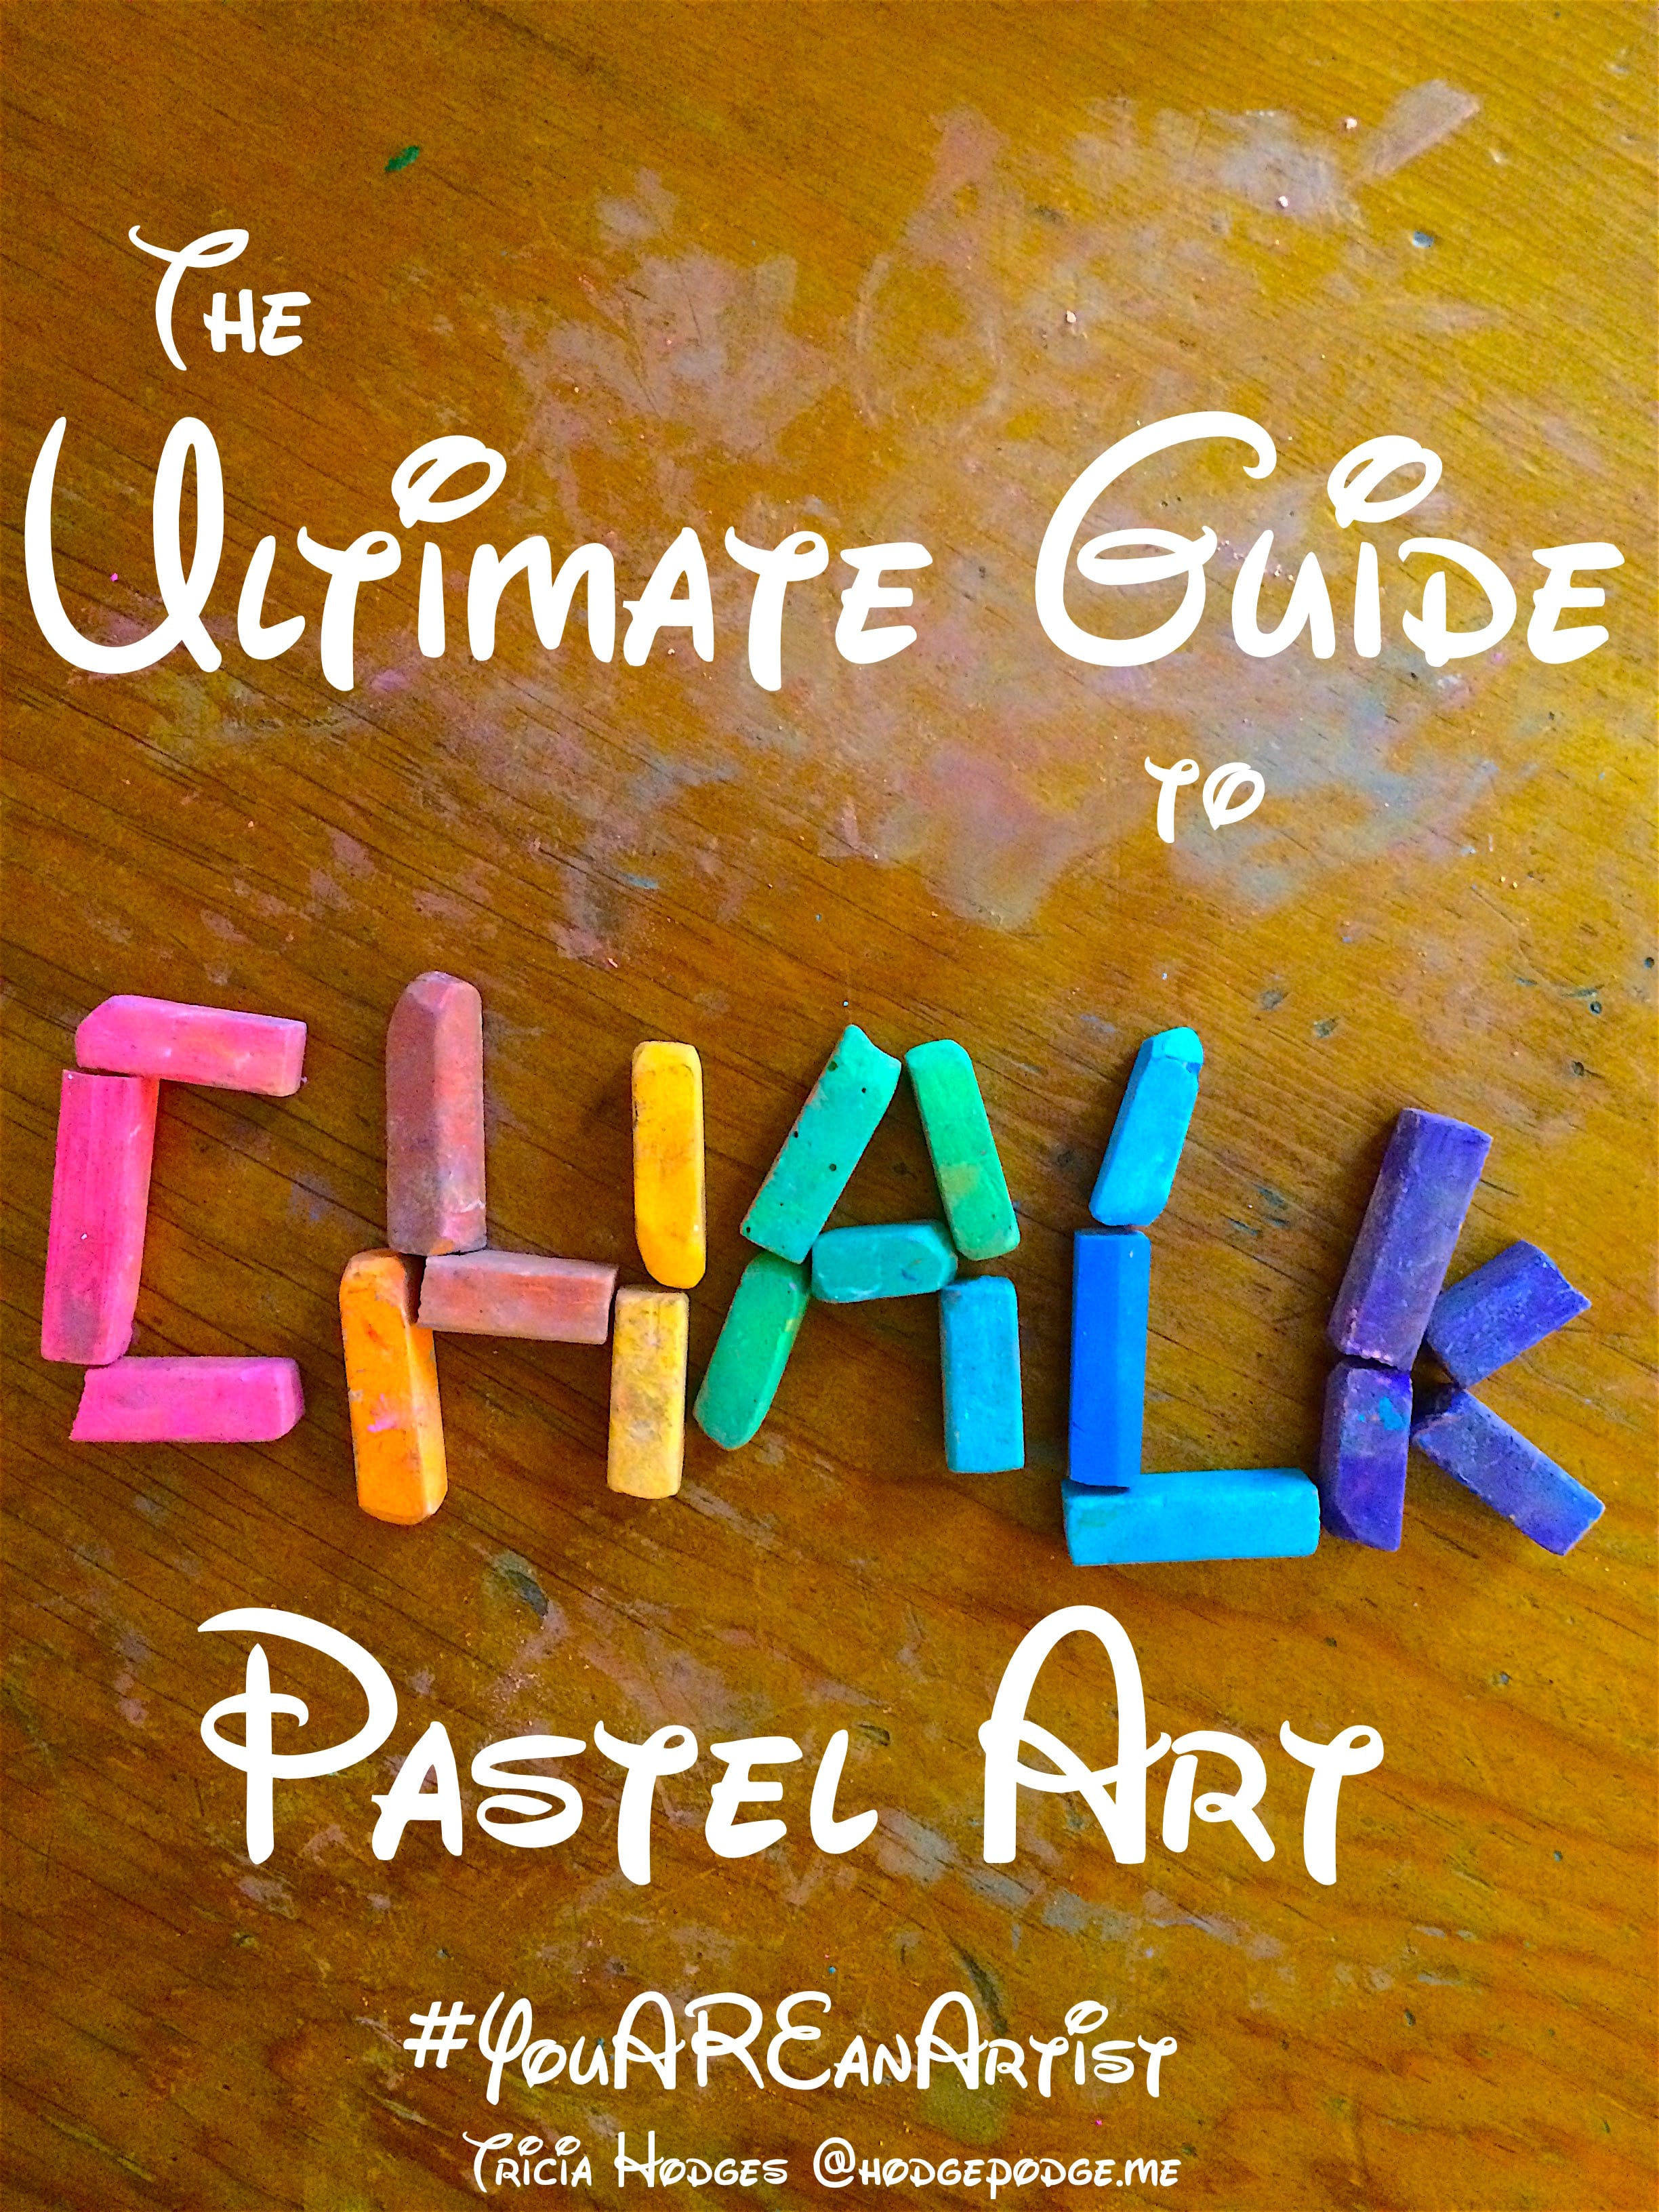 The Ultimate Guide to Chalk Pastel Art